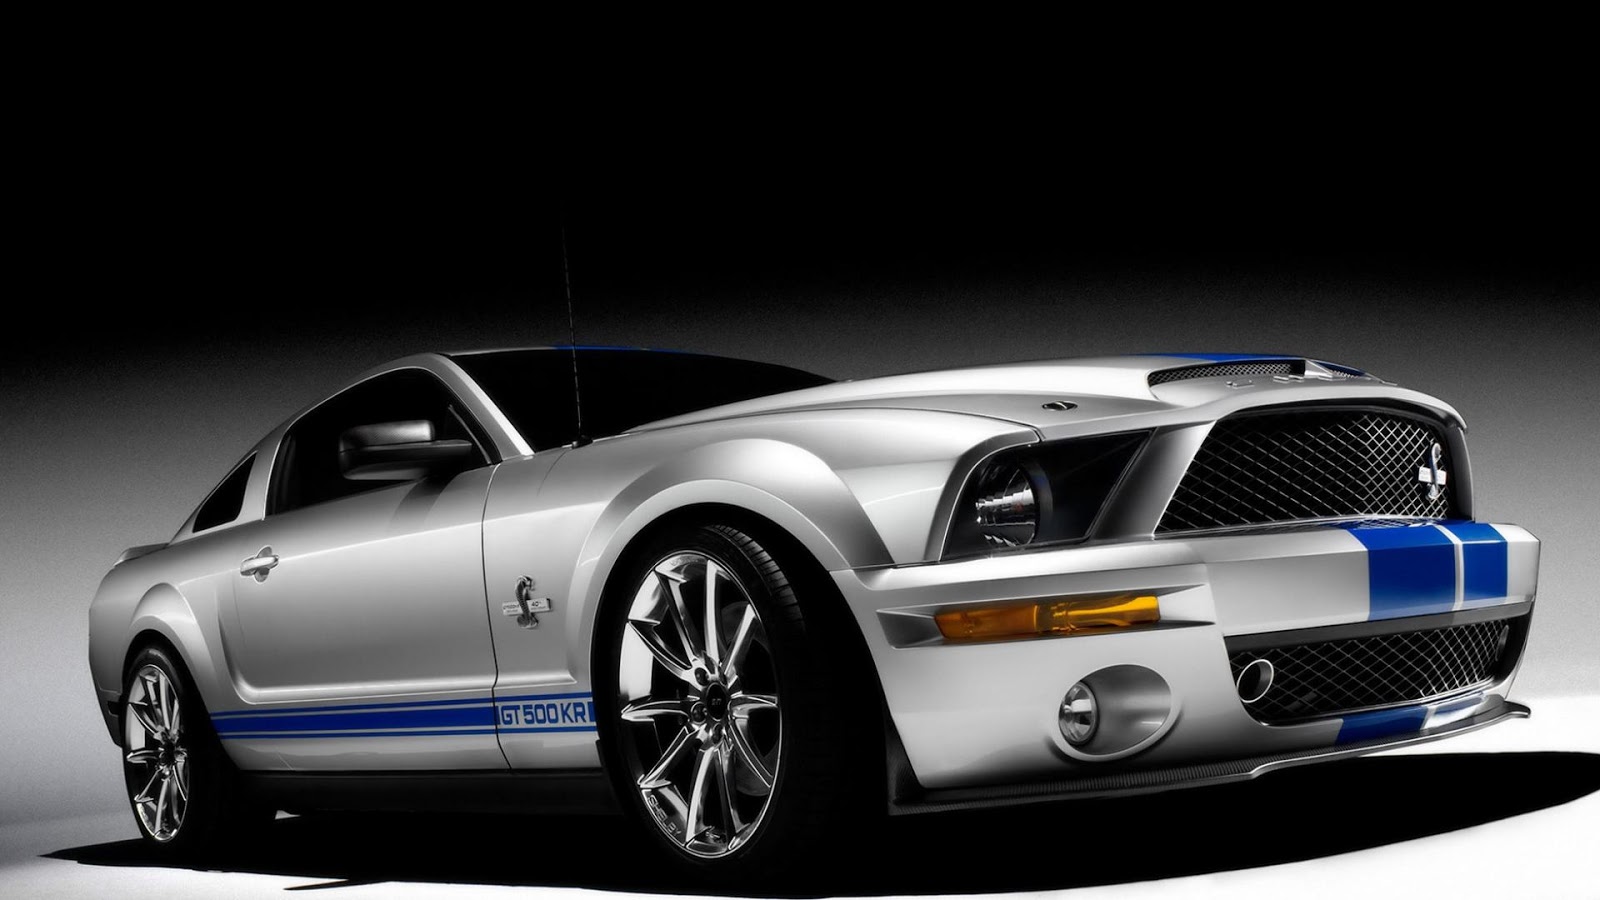 Free 3D Wallpapers Download: Hd wallpapers cars 20 Wallpaper